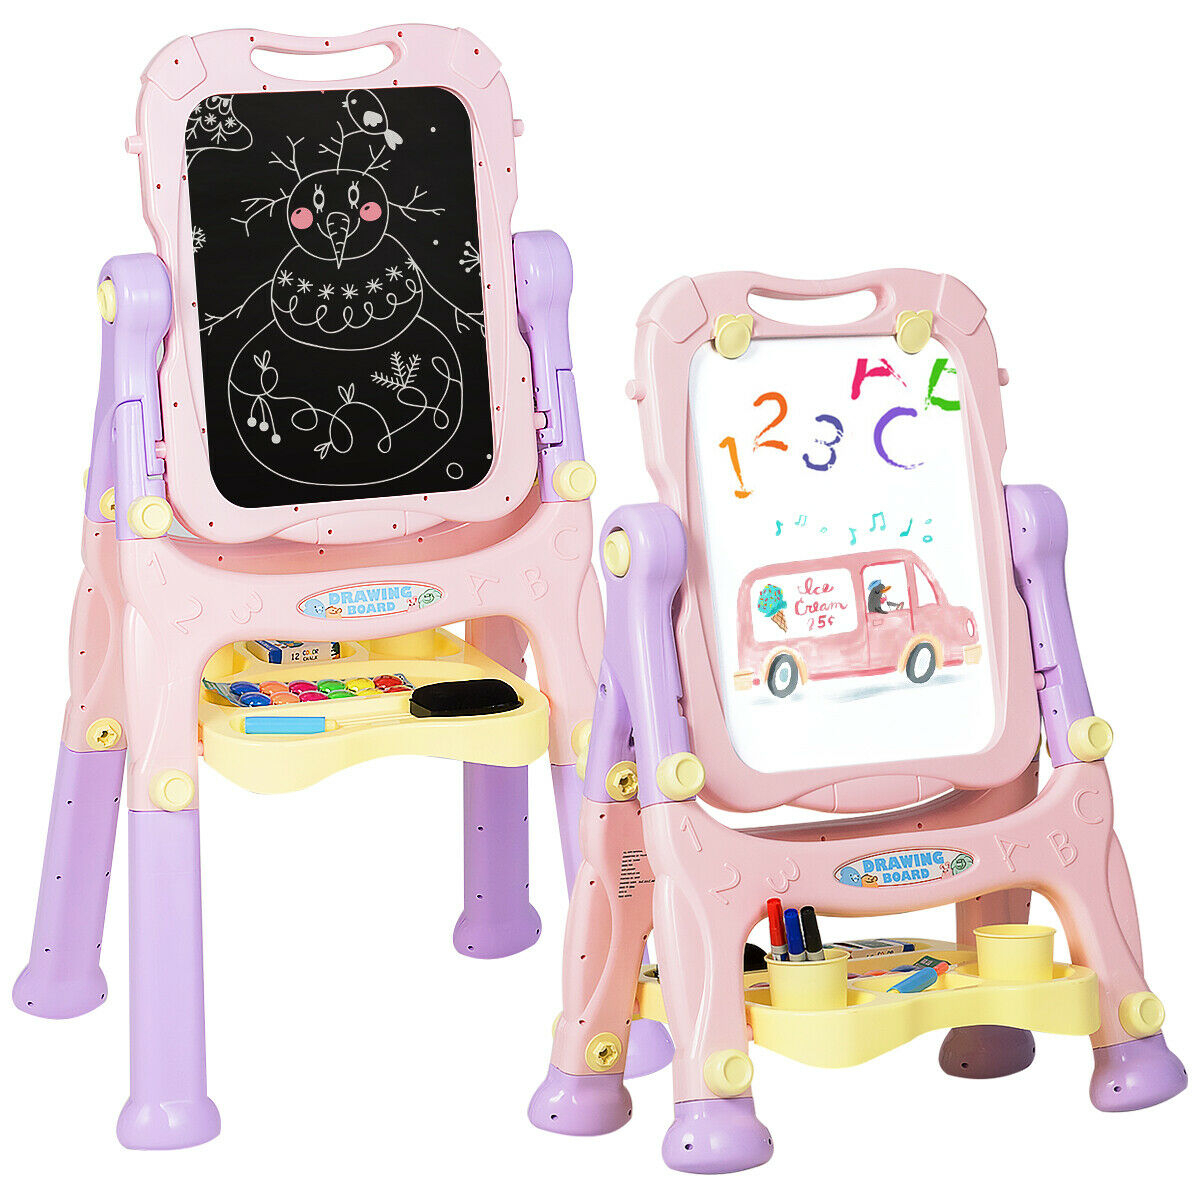 Height Adjustable Kids Easel Double Sided Art Easel Purple Home